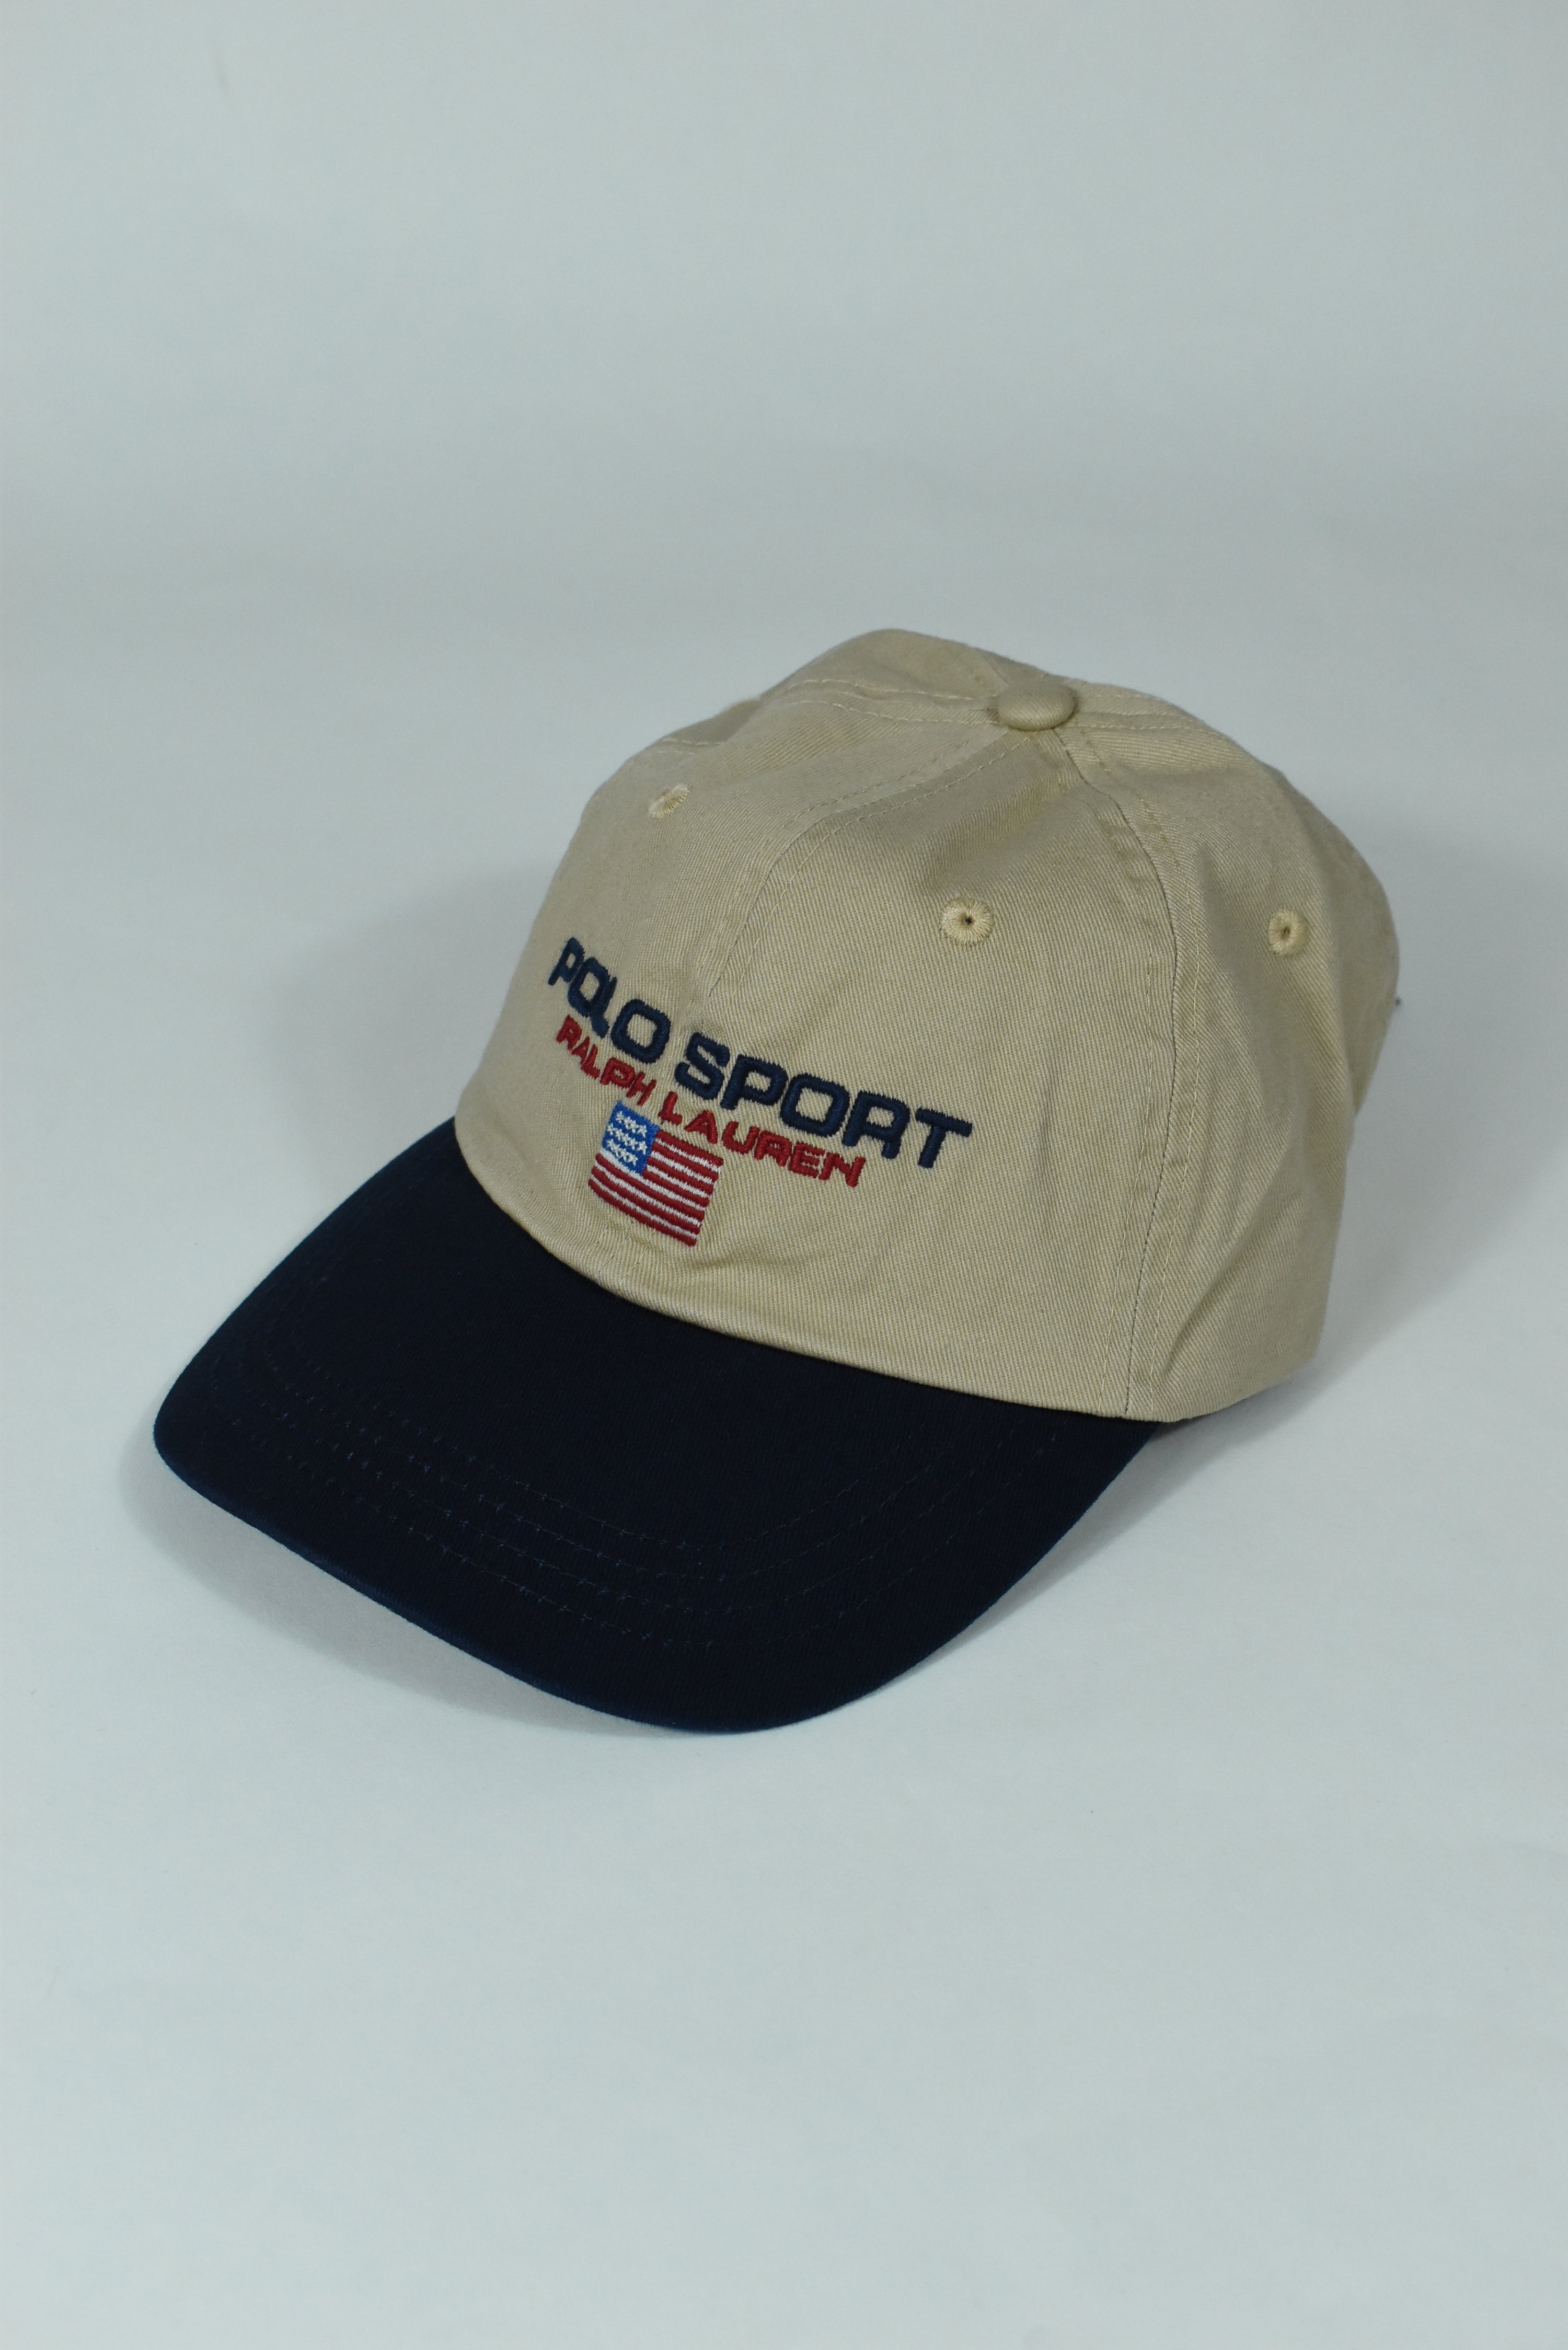 New Beige/Navy RL Polo Sport Embroidery Cap